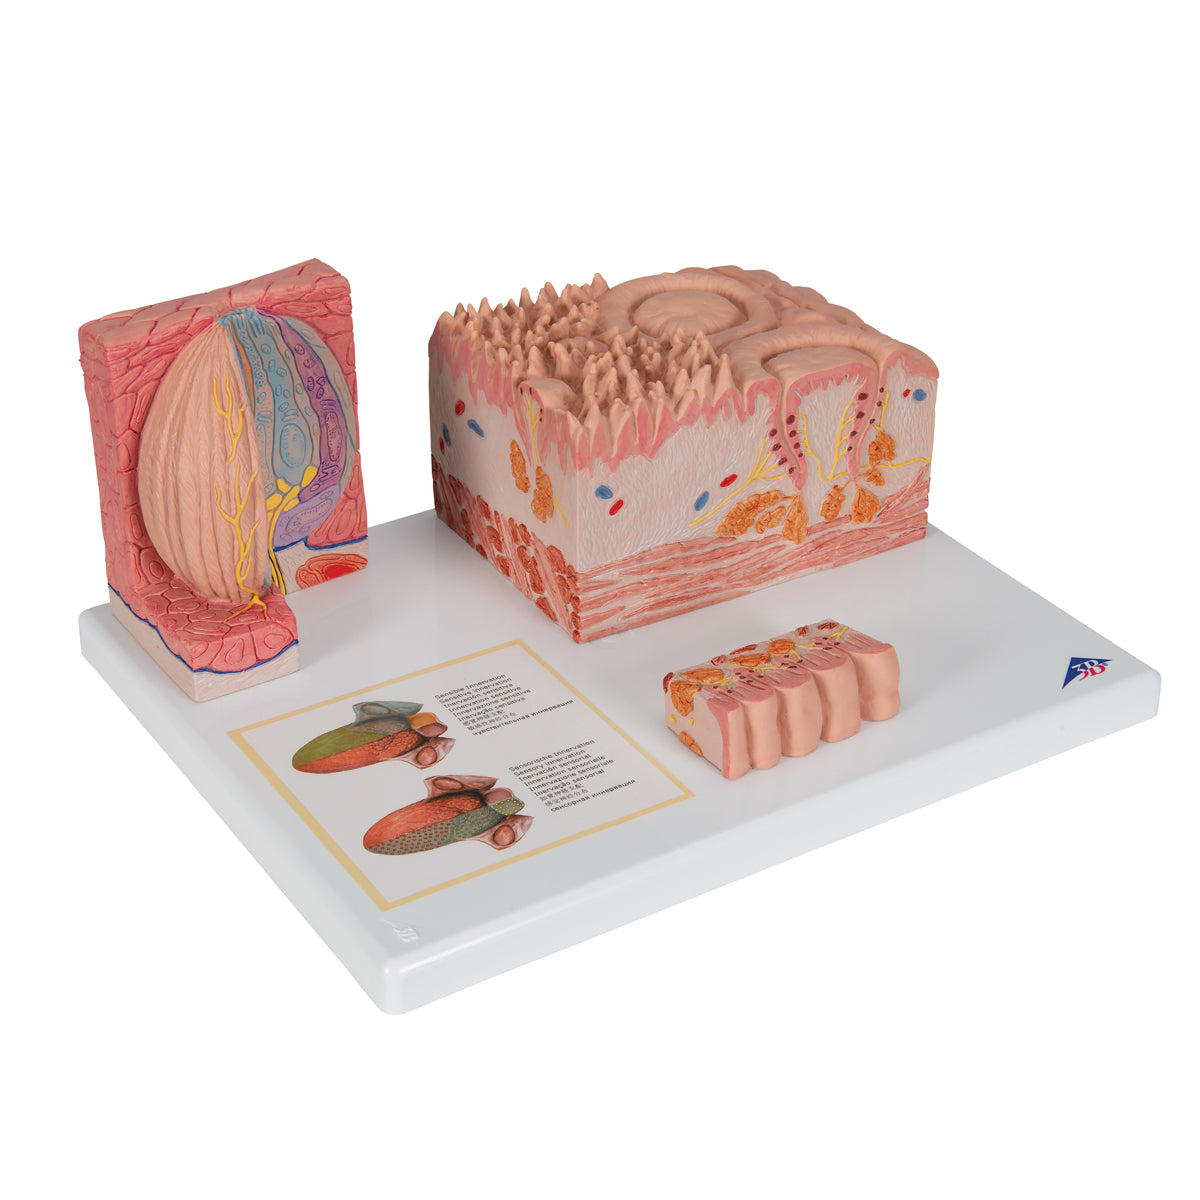 Detailed model of the different tissues of the tongue in a microscopic perspective